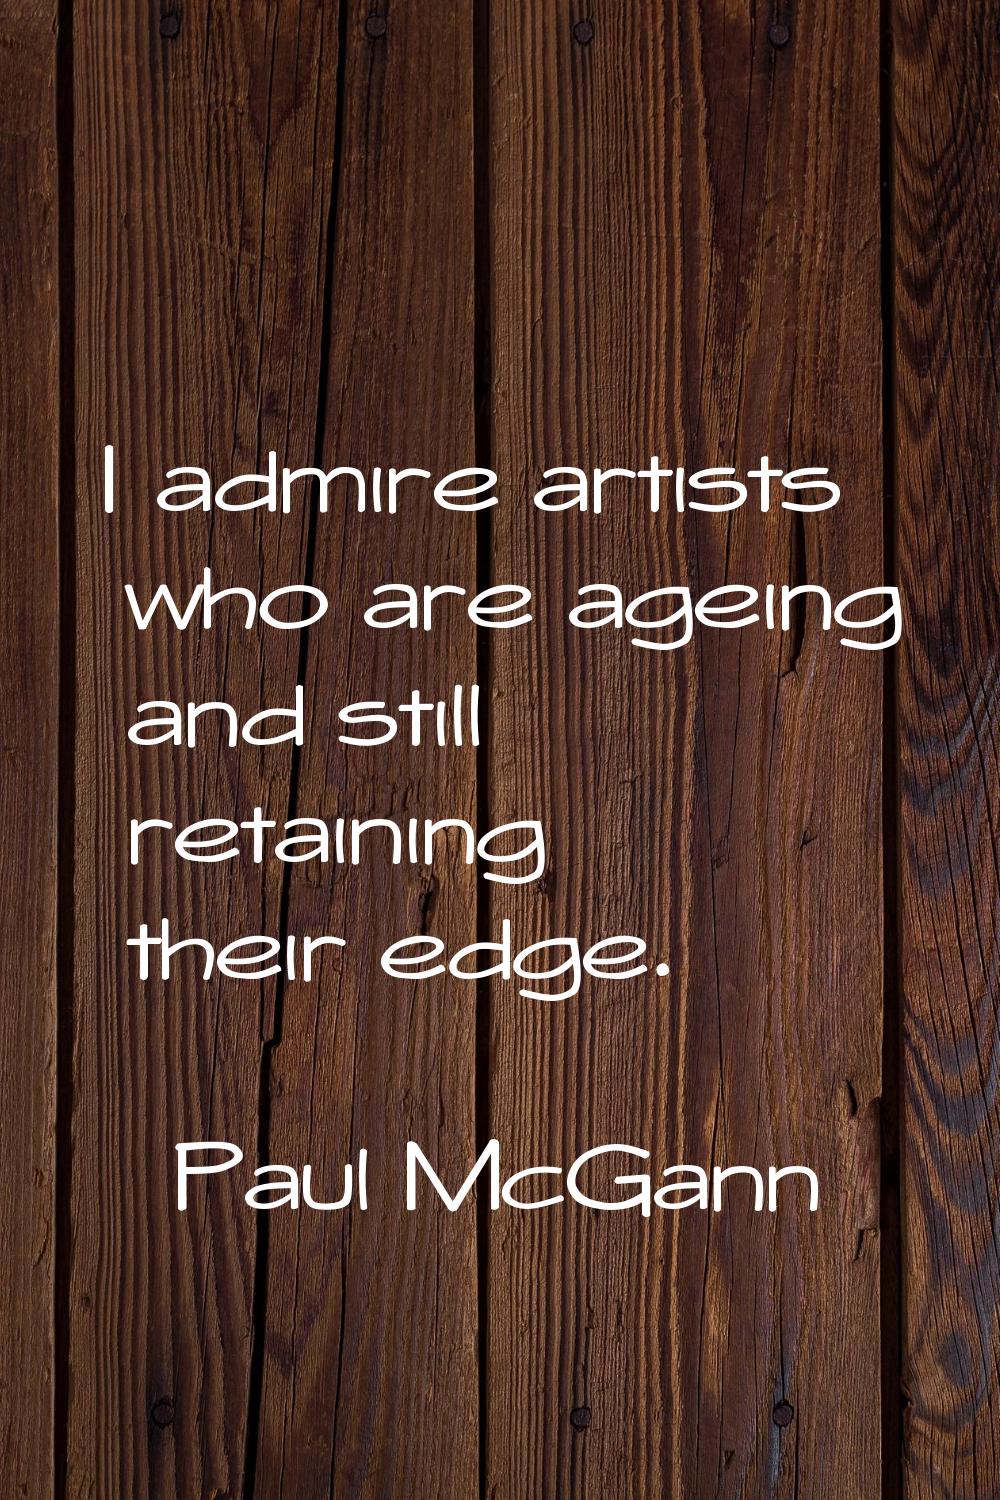 I admire artists who are ageing and still retaining their edge.